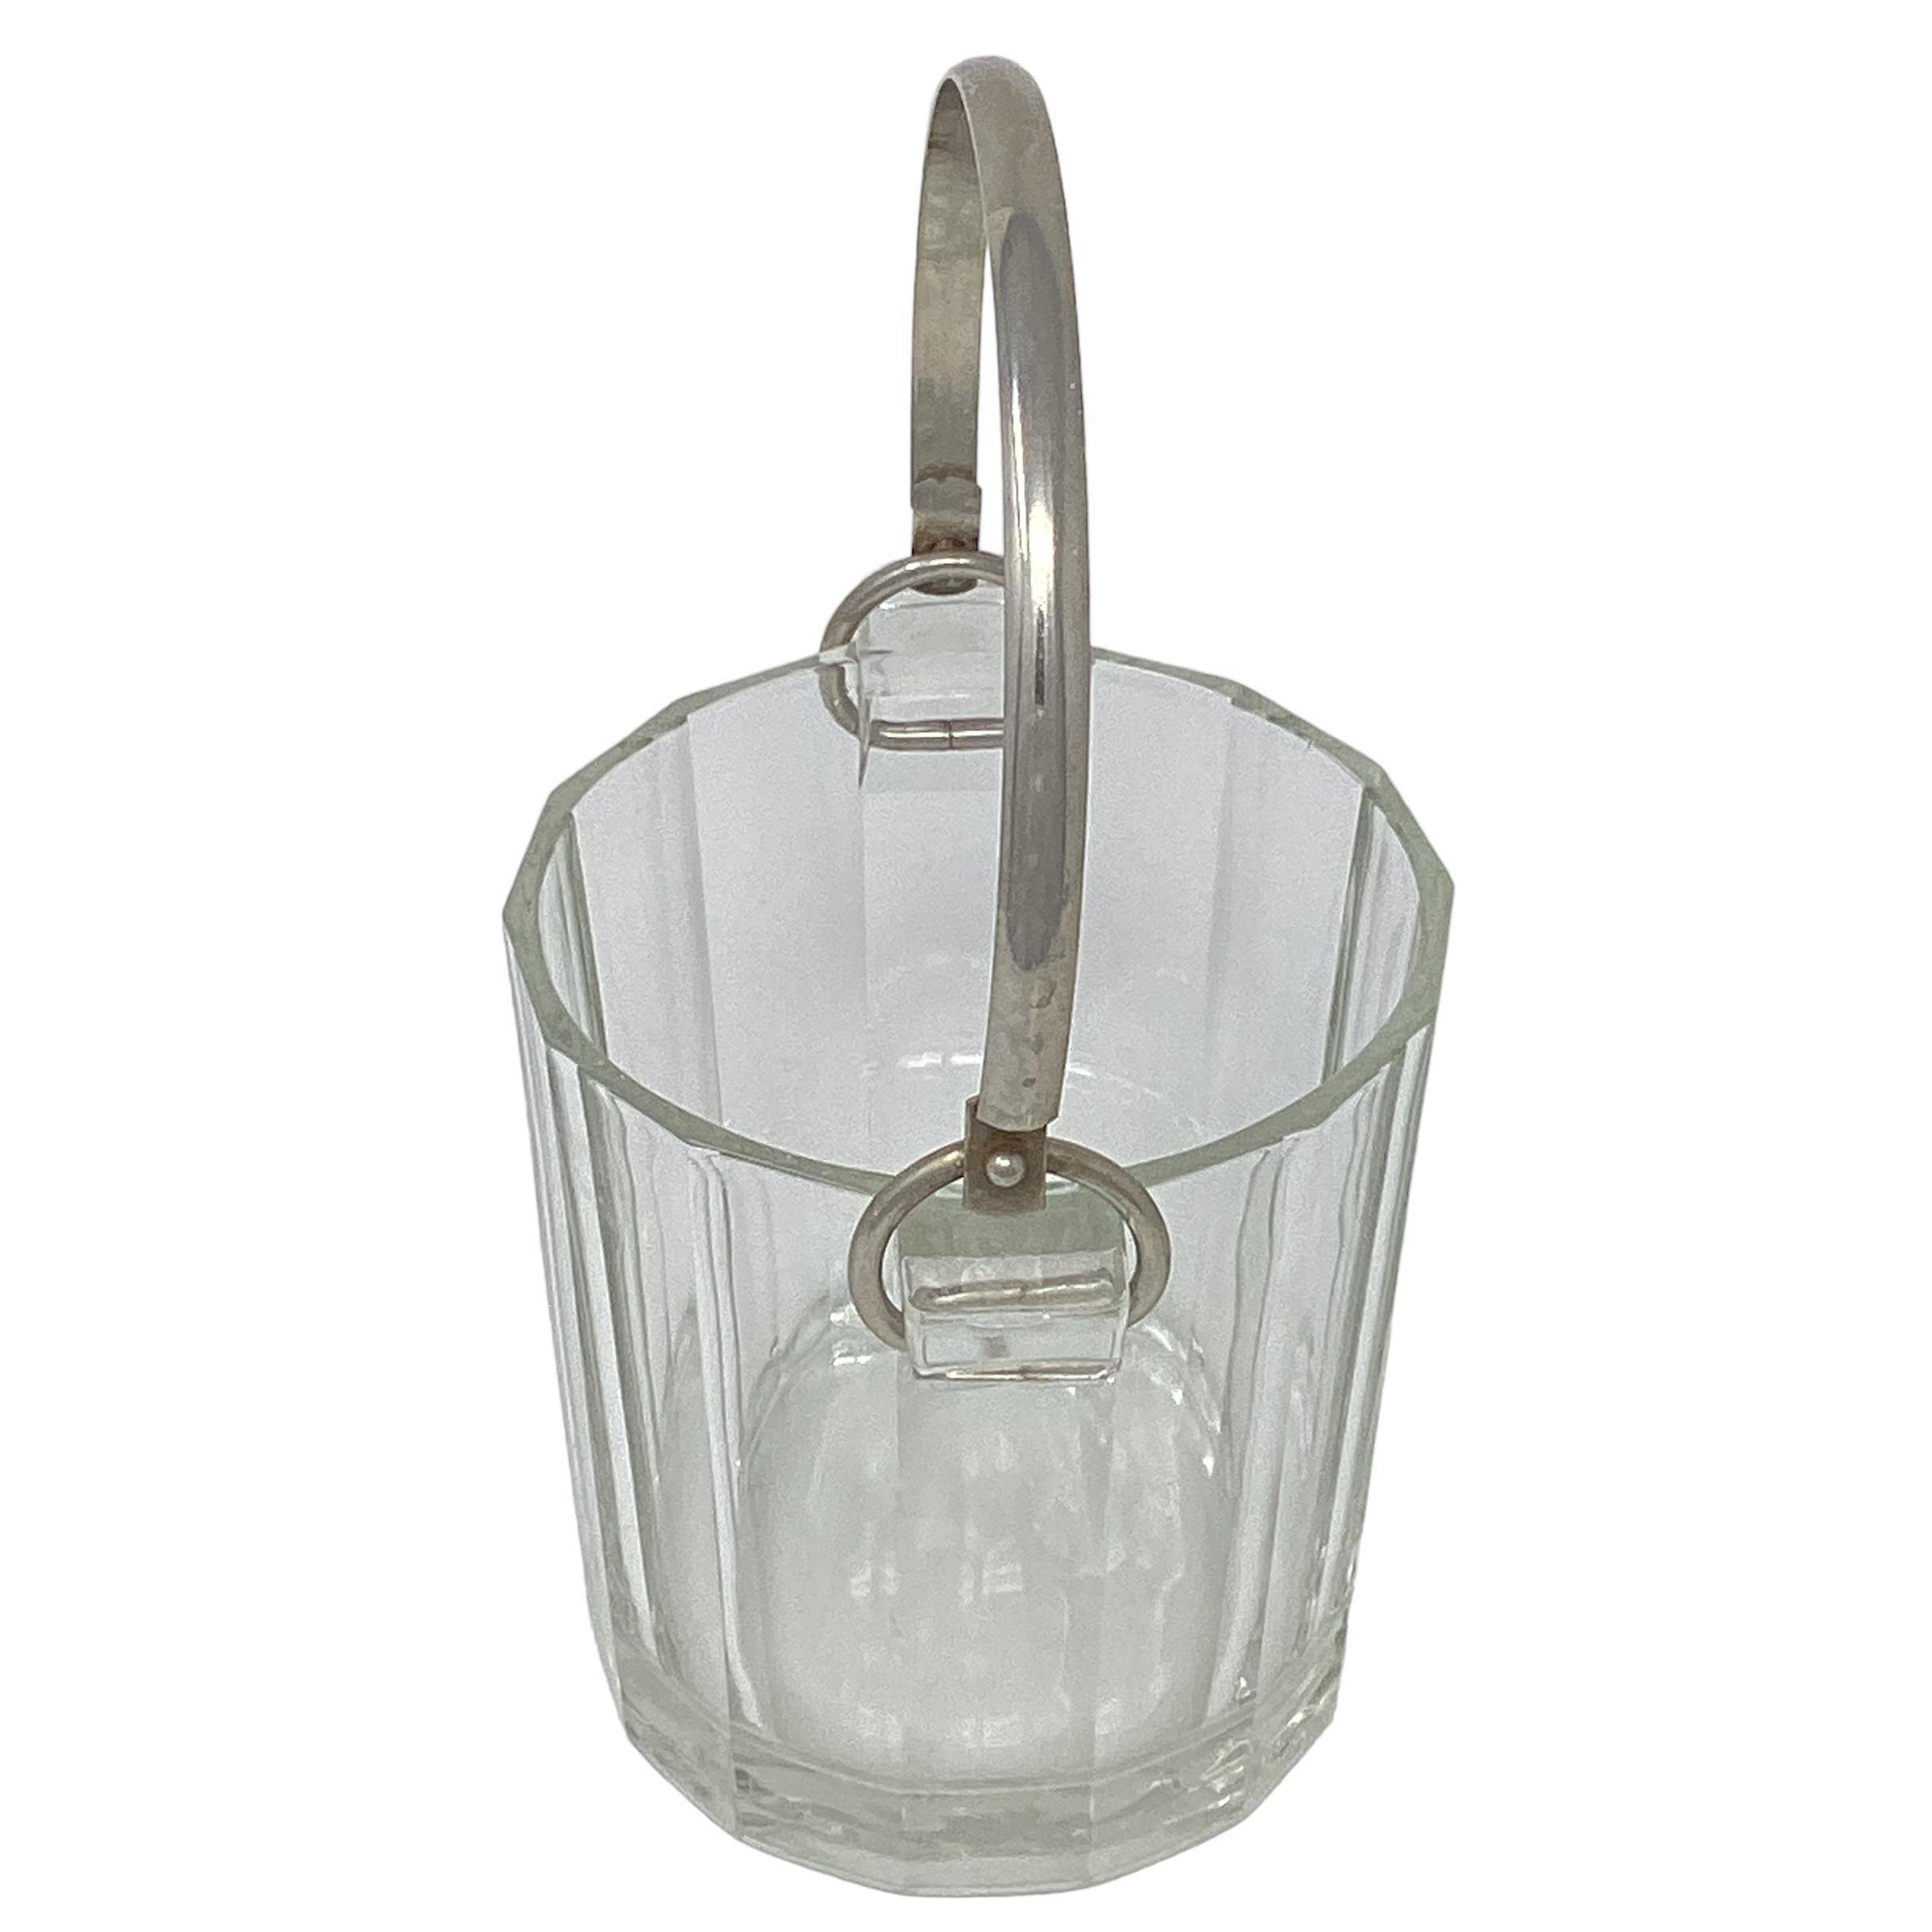 Vintage Italian Mid Century Modern Glass Ice Bucket. Paneled glass design with with chrome handle.